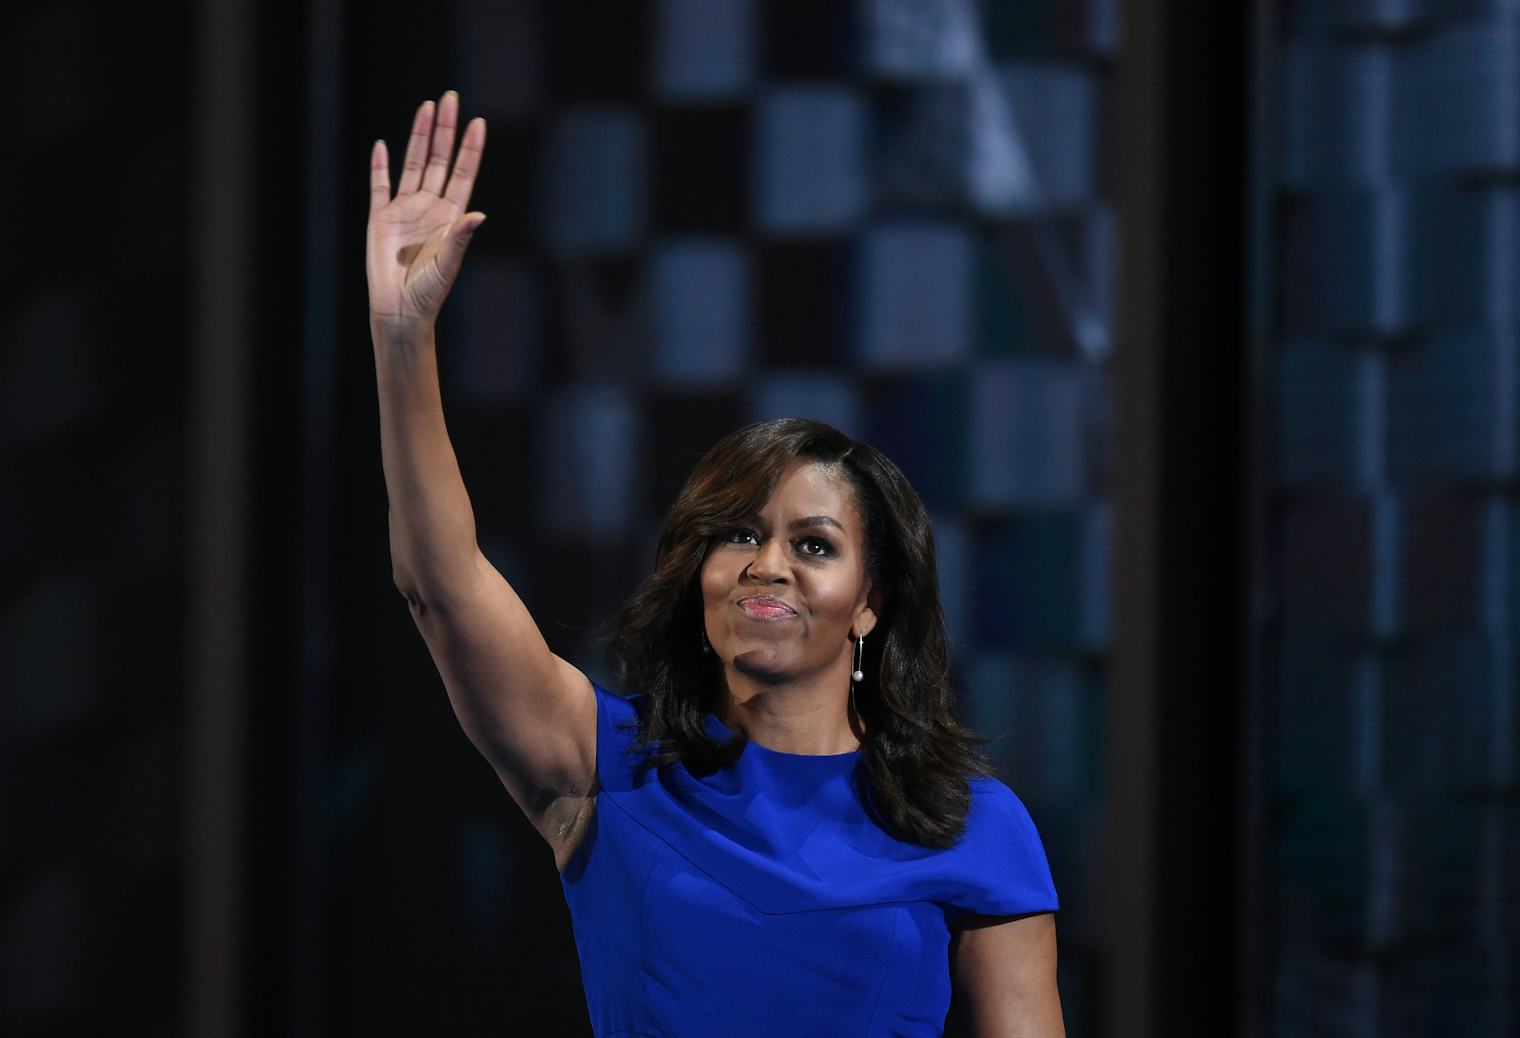 This Michelle Obama Quote Shows How Women And Men Can — And Should — Come